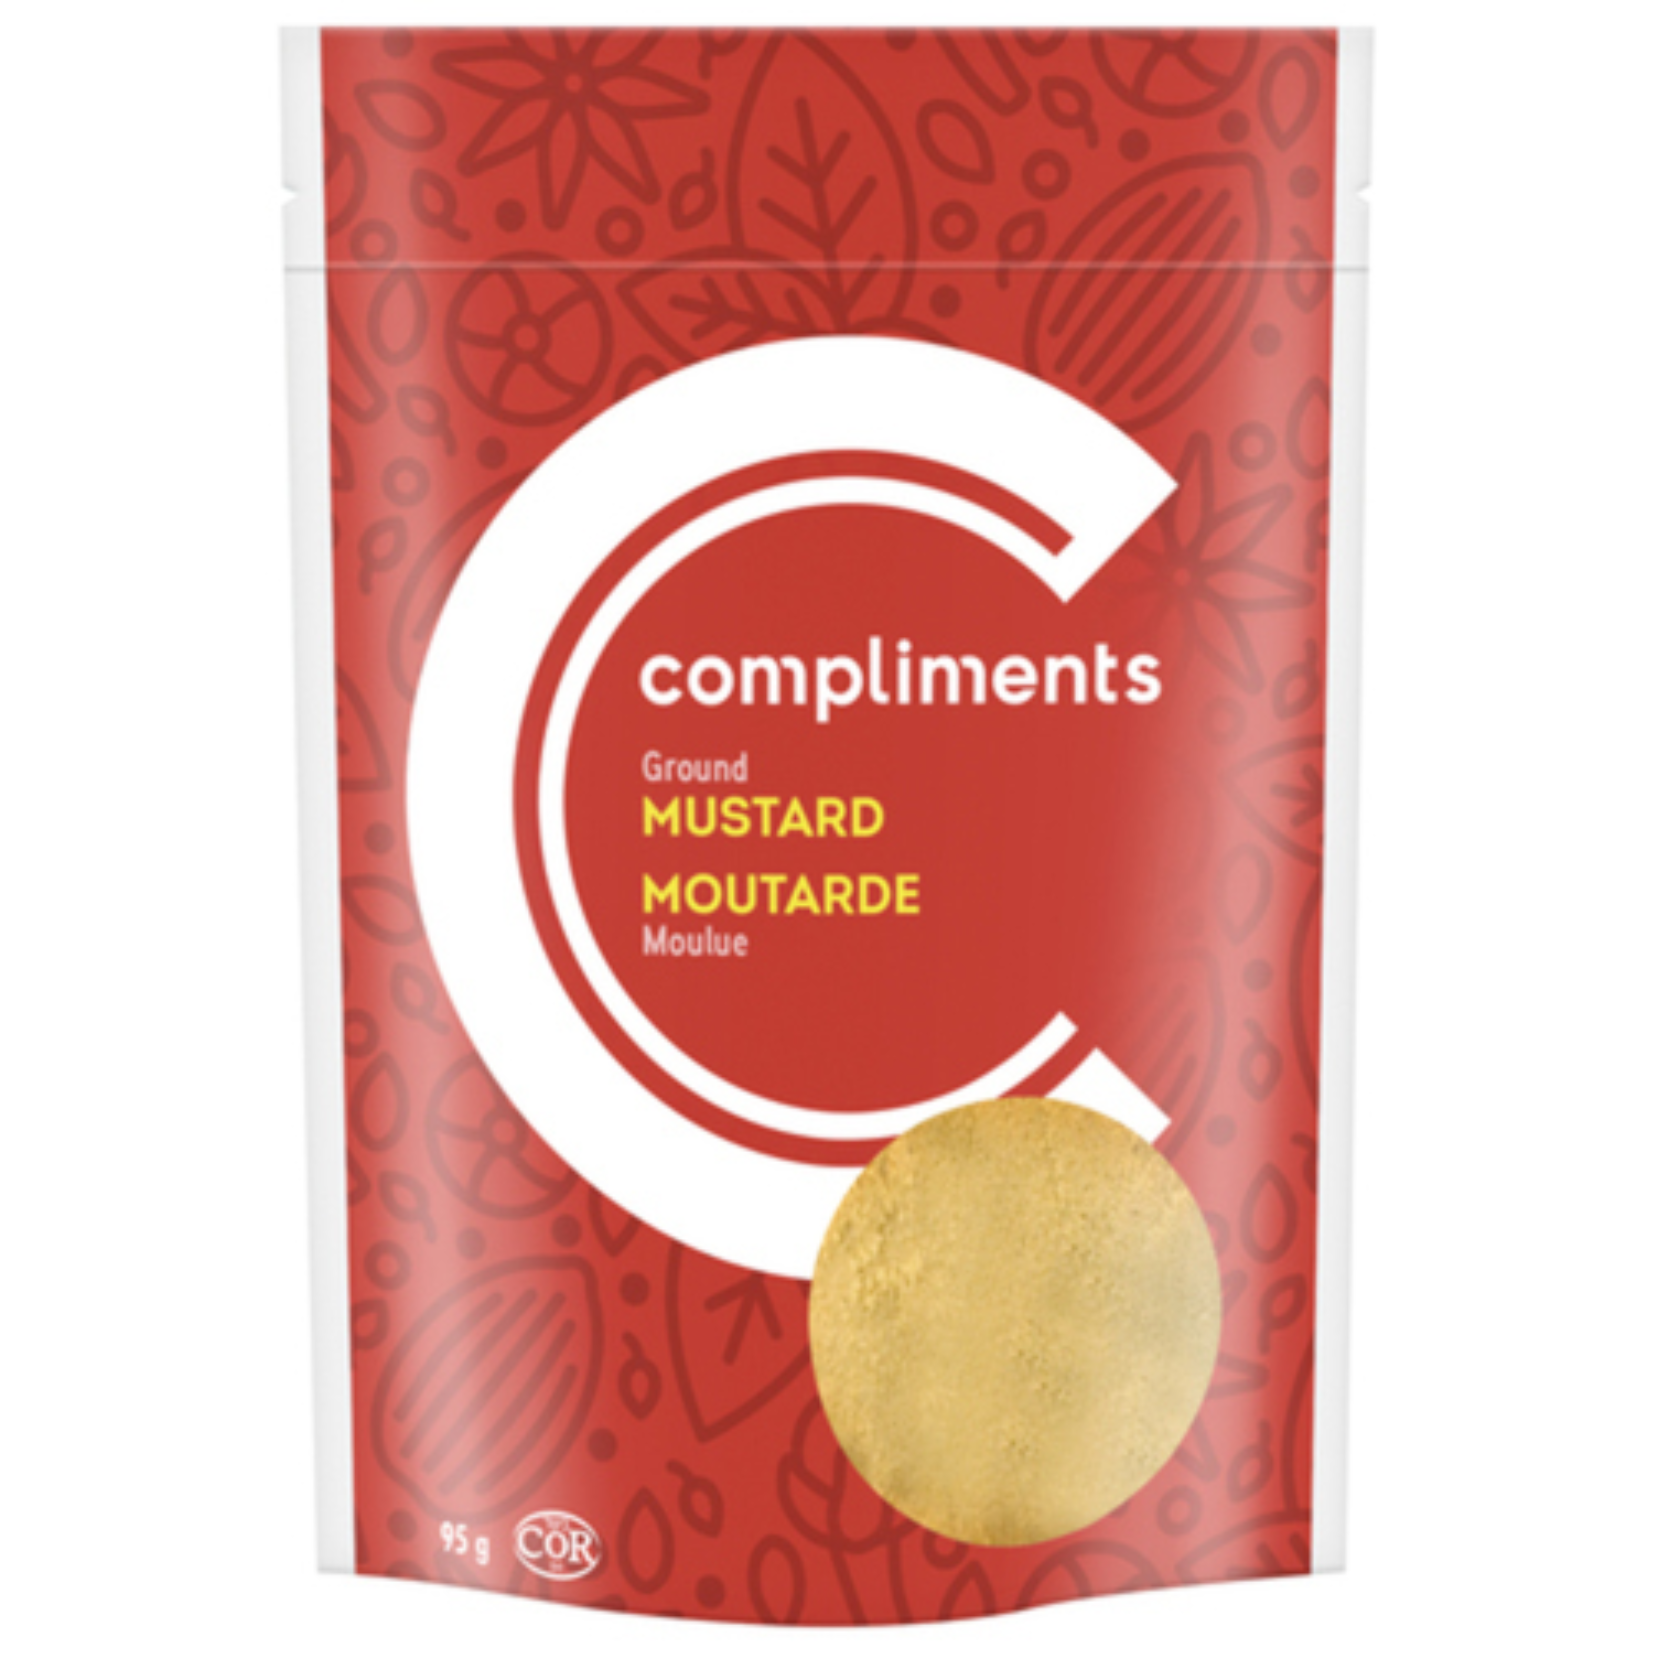 Compliments Ground Mustard 95g